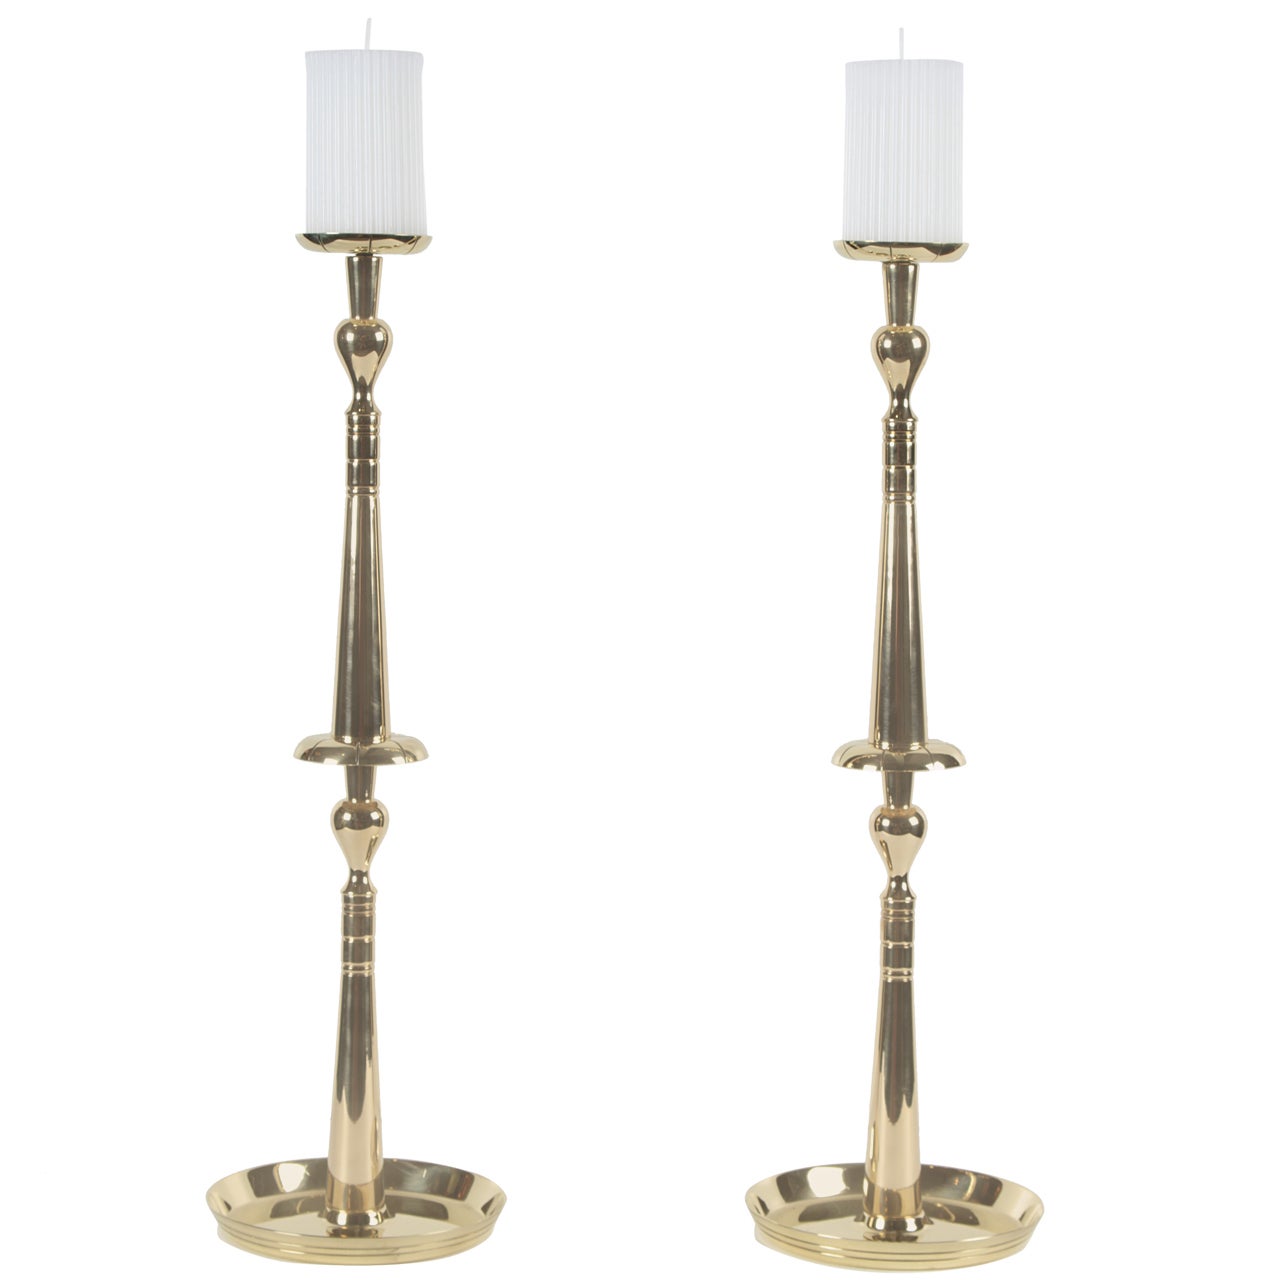 Pair of Brass Spindle Candlesticks by Tommi Parzinger